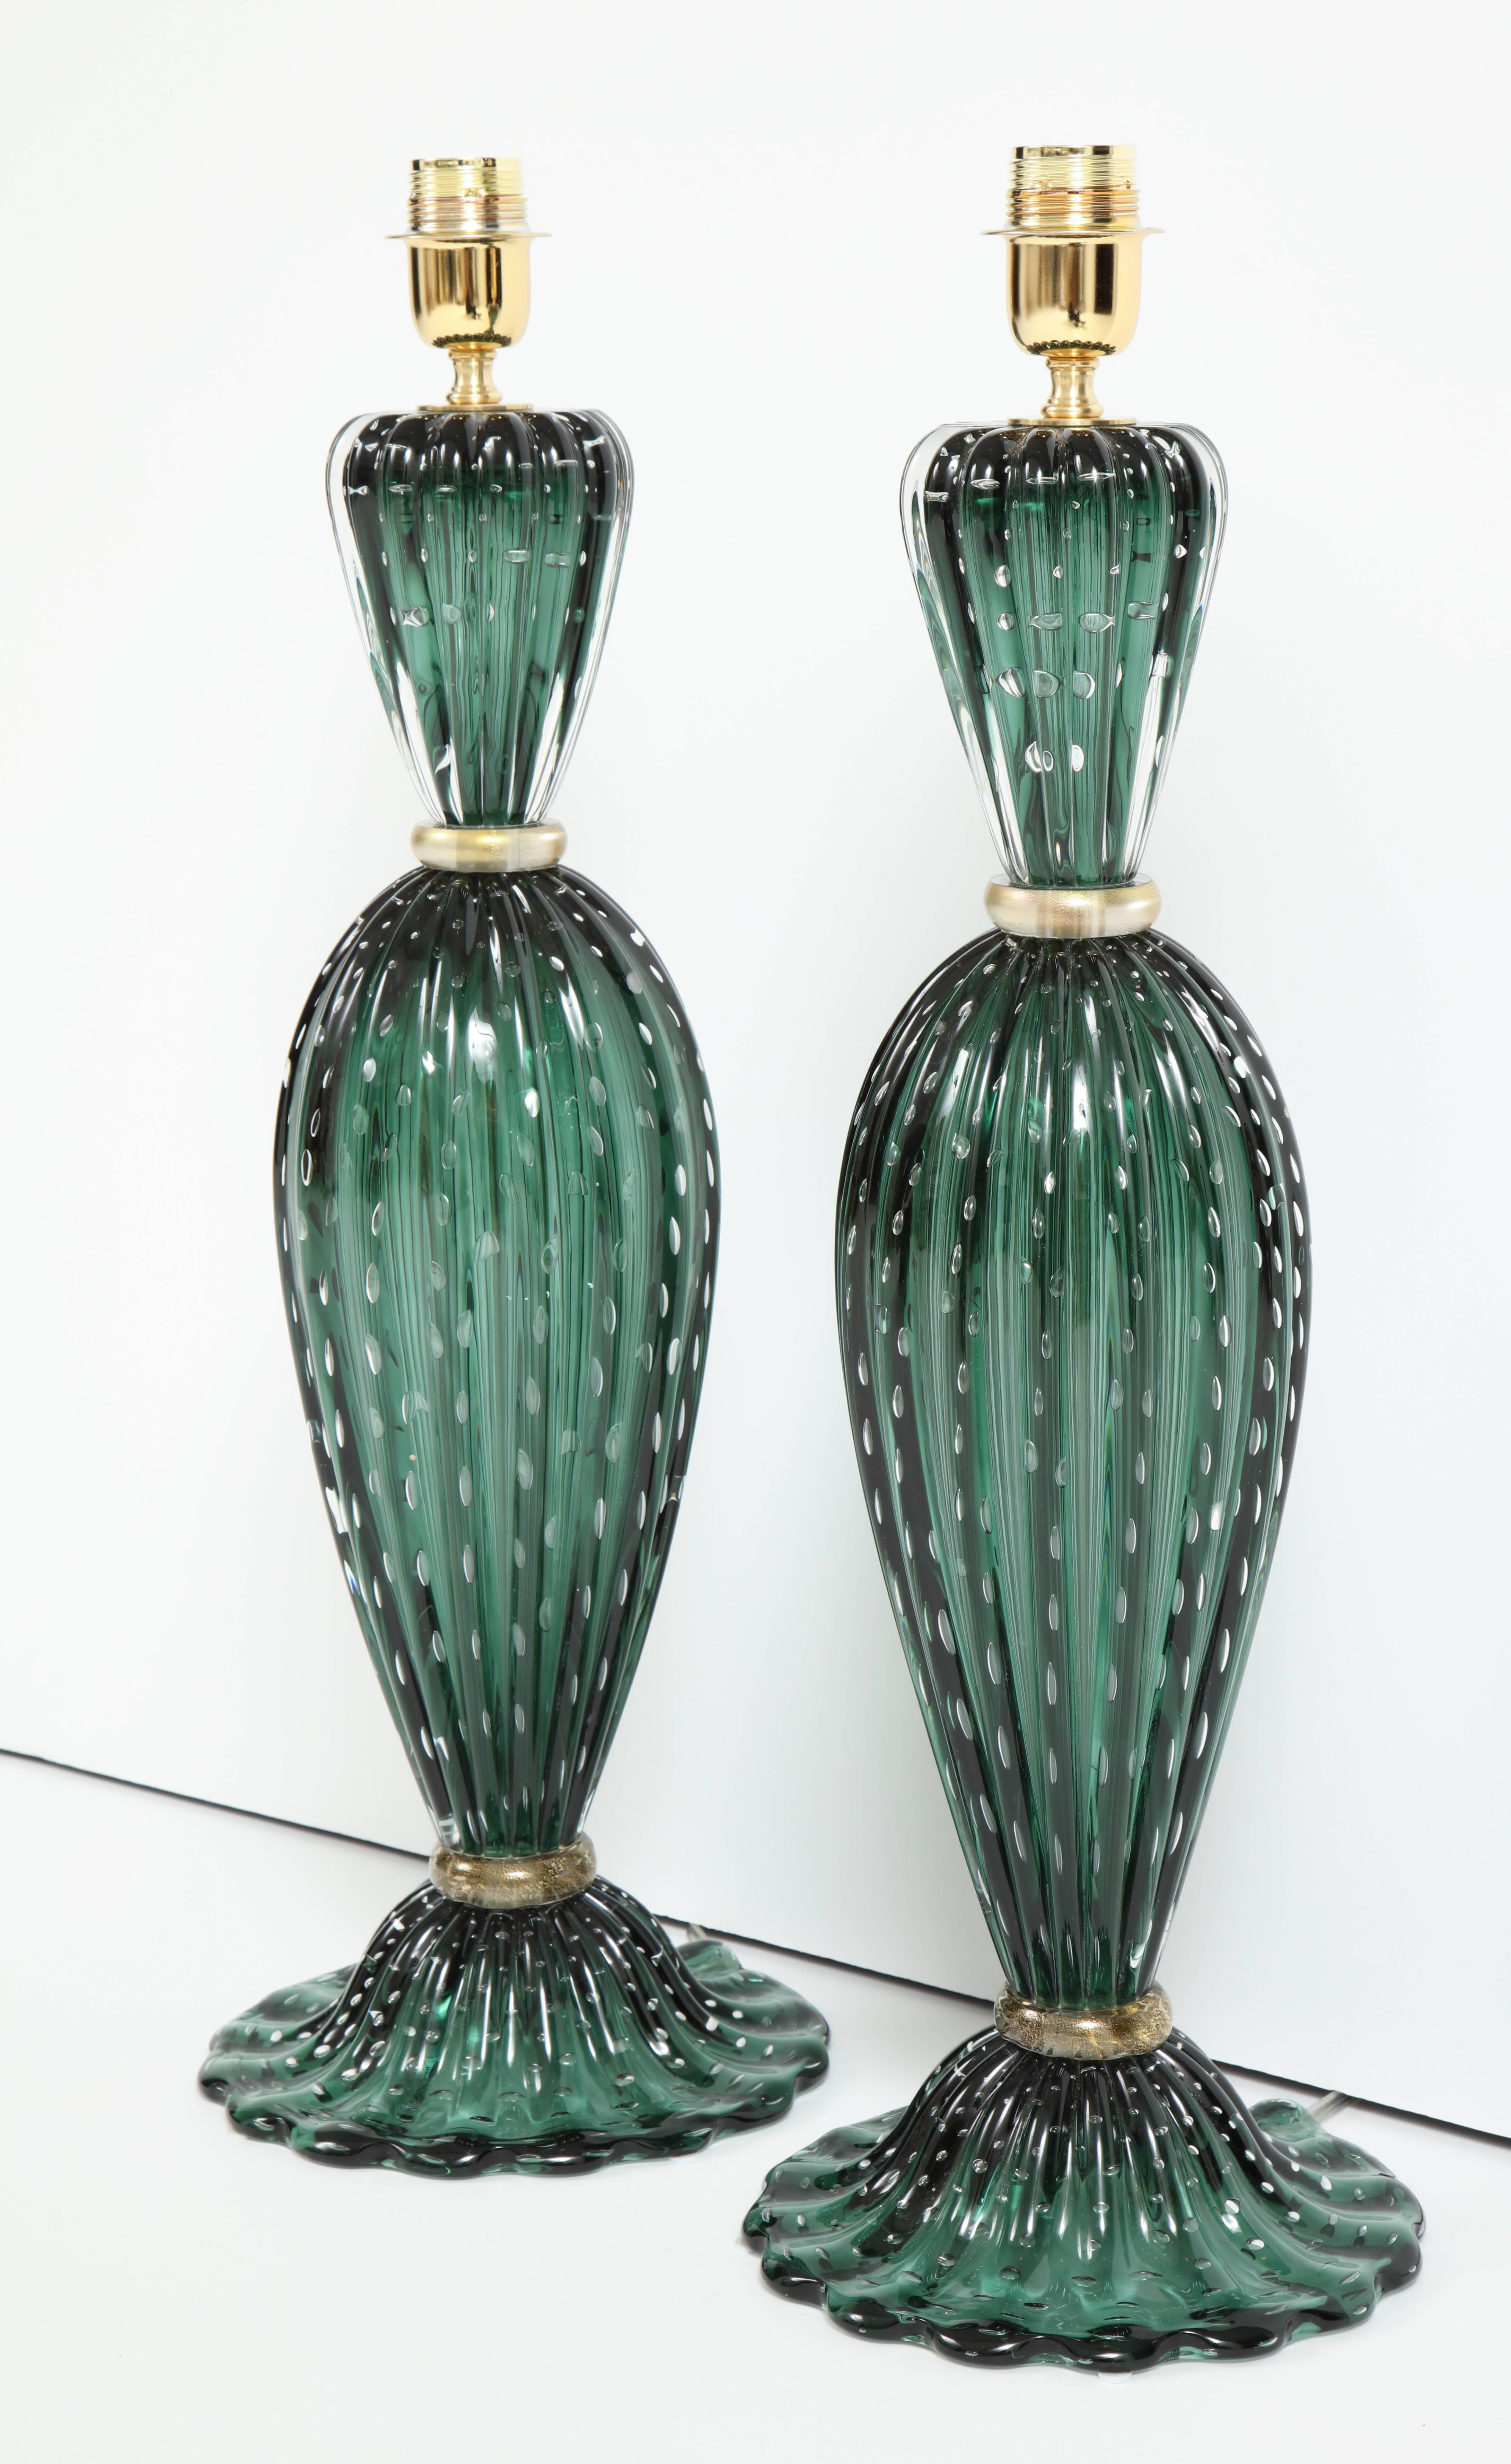 The color of this pair of green Italian handblown Murano glass lamps is so unique and absolutely gorgeous! Emerald green Pulegoso glass lamps. Elegantly shaped with teardrop body and scalloped base. Gold rings separate each glass component. Wired